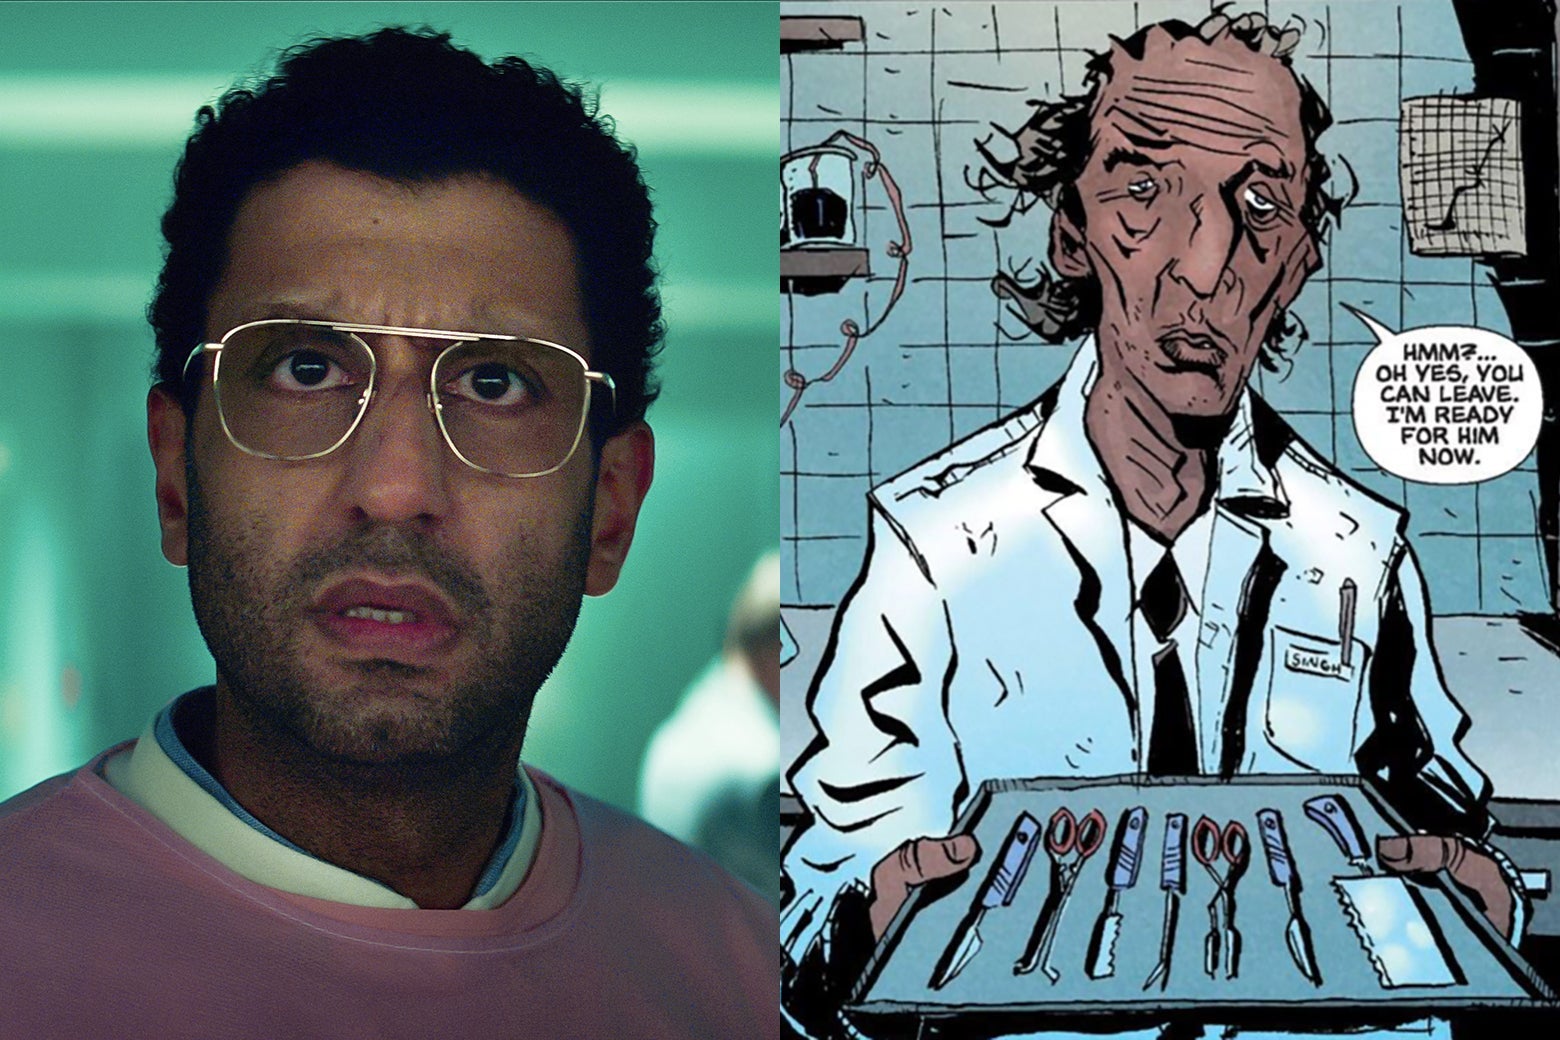 A split-screen: On the left, actor Adeel Akhtar, a normal looking guy wearing gold glasses and pink surgical scrubs, looks at the camera in the role of Dr. Singh on Sweet Tooth. On the right, a panel from the Sweet Tooth comic book showing Singh as Lemire draws him, a grotesque monster with a shamble of a face.